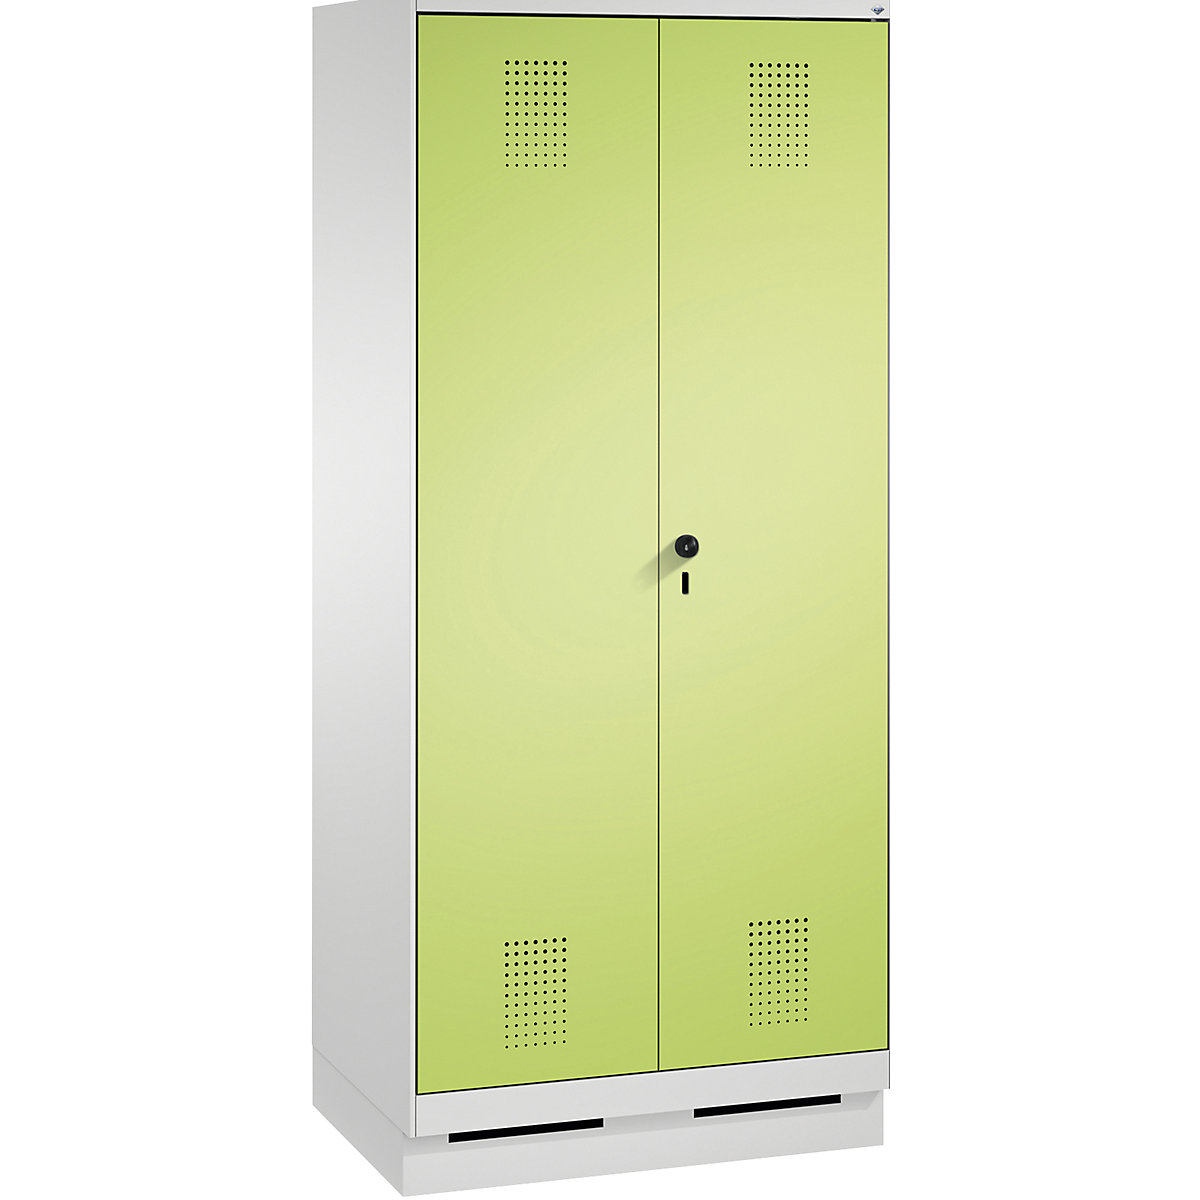 EVOLO laundry cupboard / cloakroom locker – C+P, 4 shelves, clothes rail, compartments 2 x 400 mm, with plinth, light grey / viridian green-8